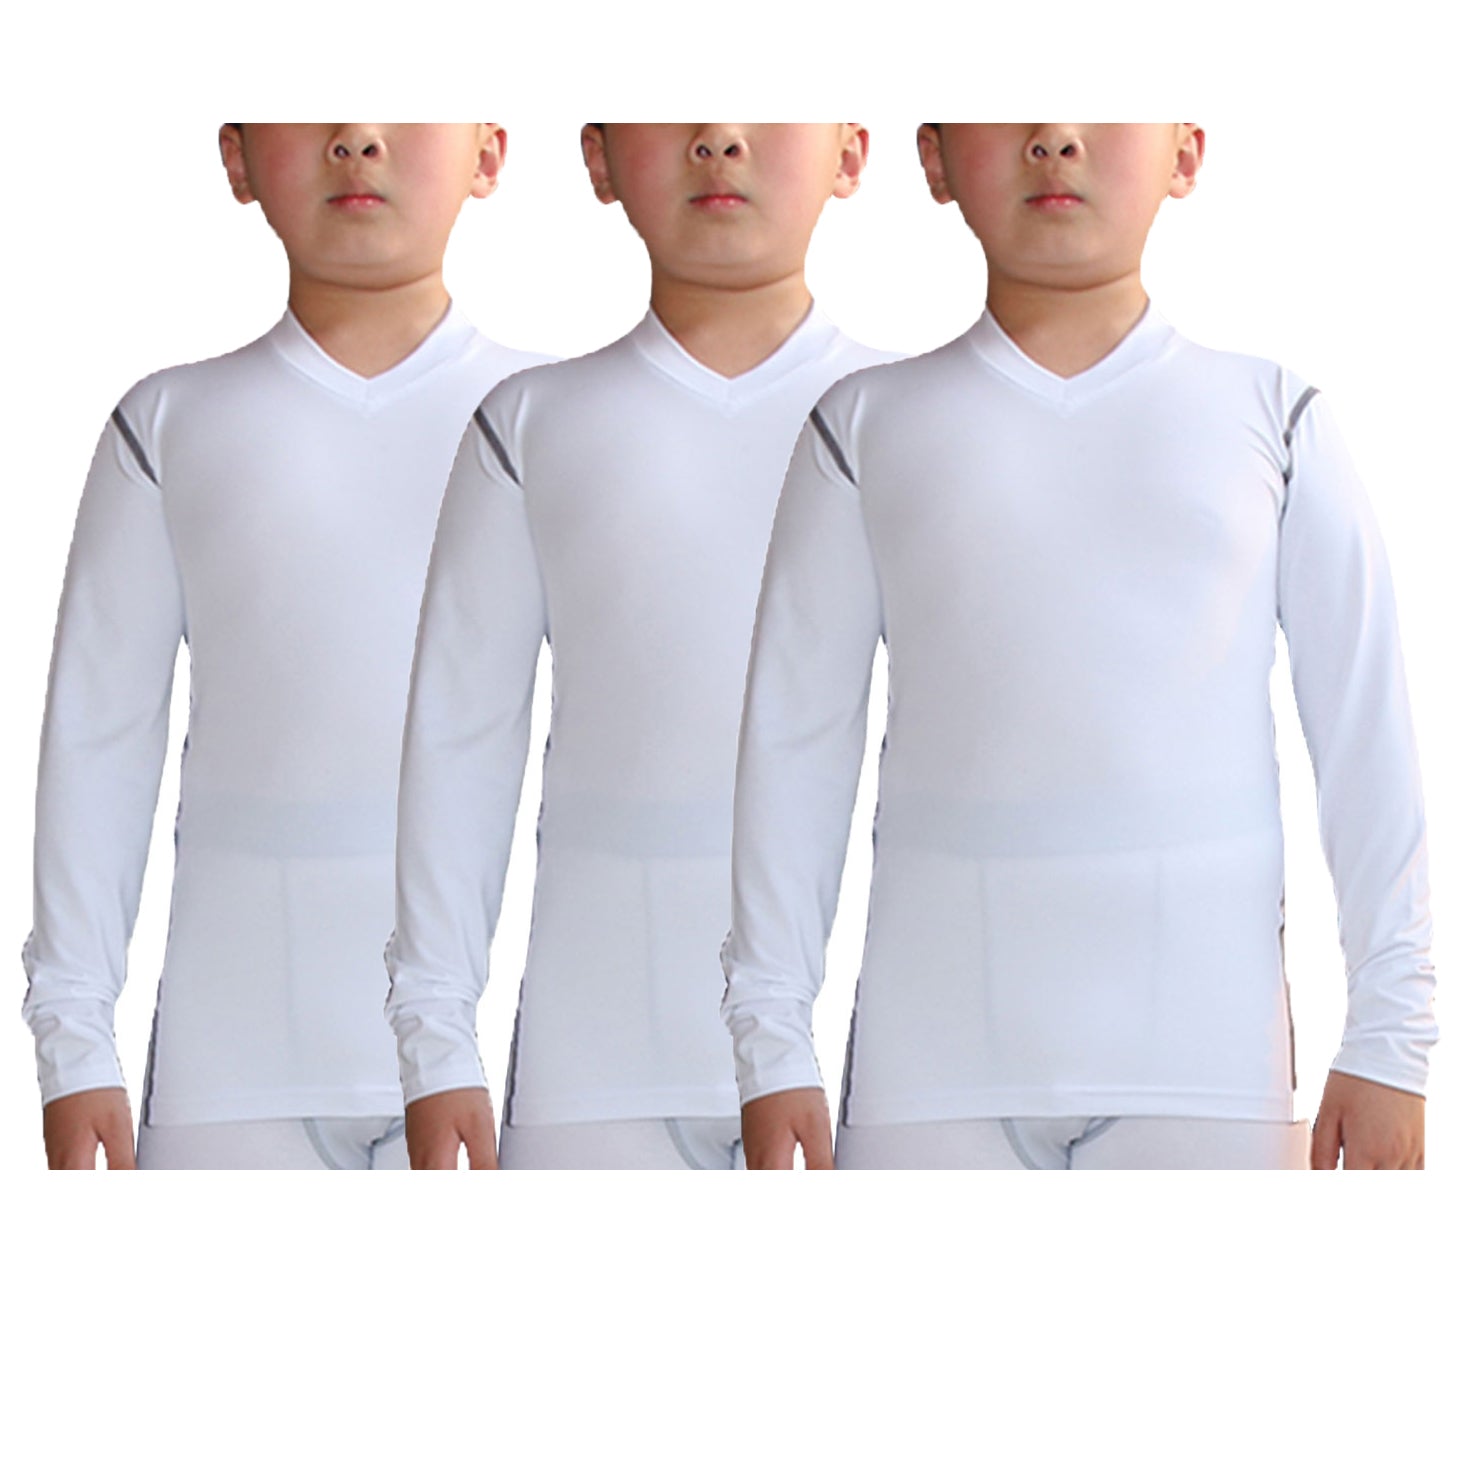 3 Pack Boys&Girls Long Sleeve Compression Soccer T-Shirt for Unisex LANBAOSI